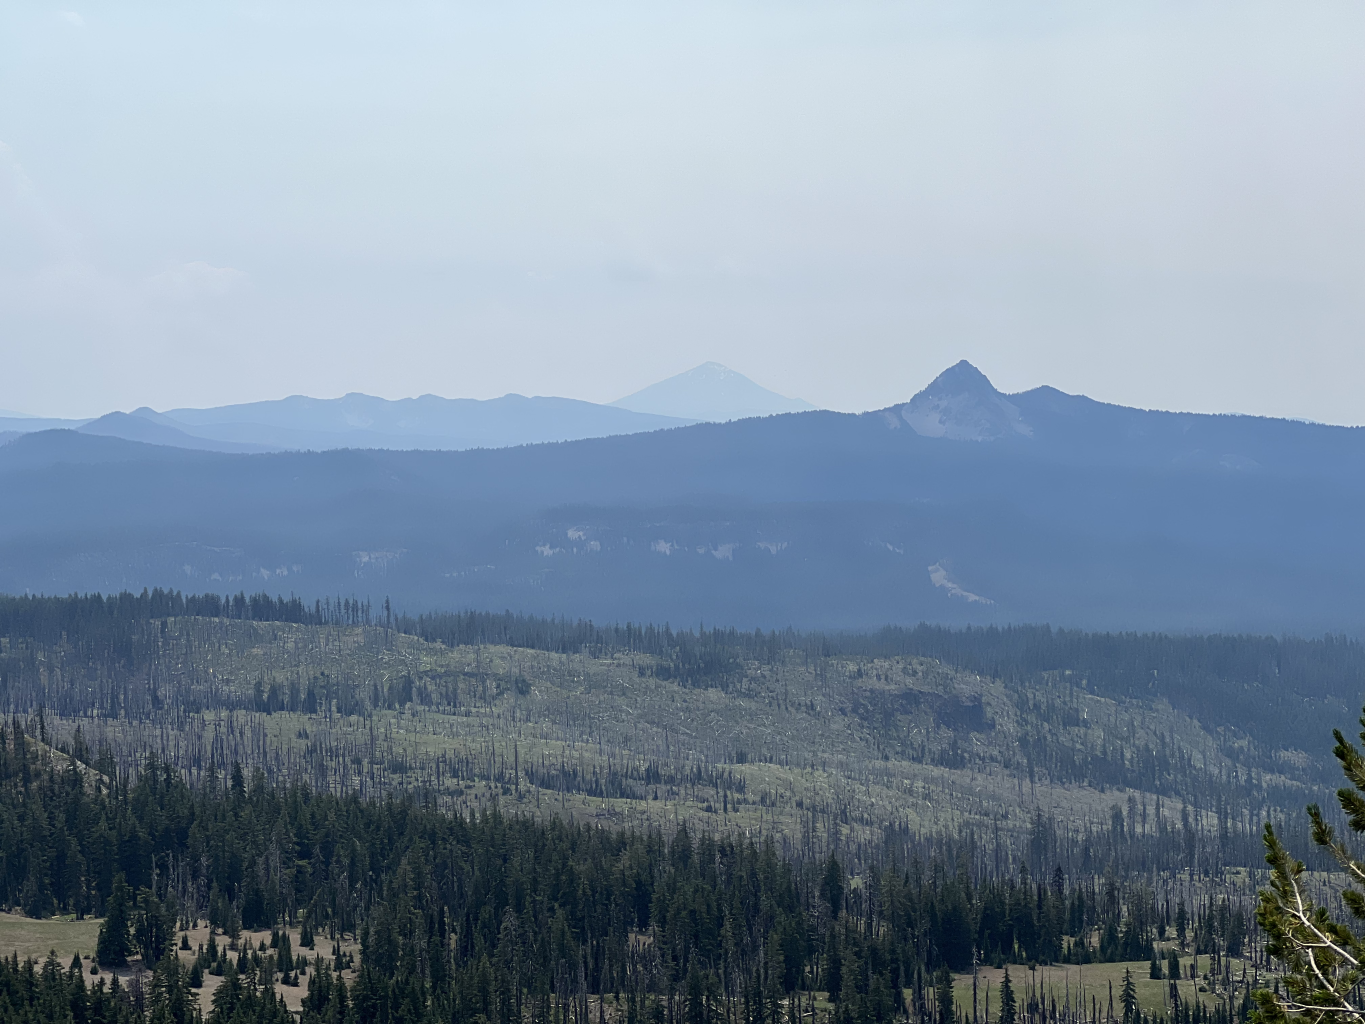  From the Watchman Flow of Stop 6, we could look to the southwest and see Union Peak and Mt. McLoughlin in the distance. Mt. Shasta was not visible due to fire smoke haze in the atmosphere. 